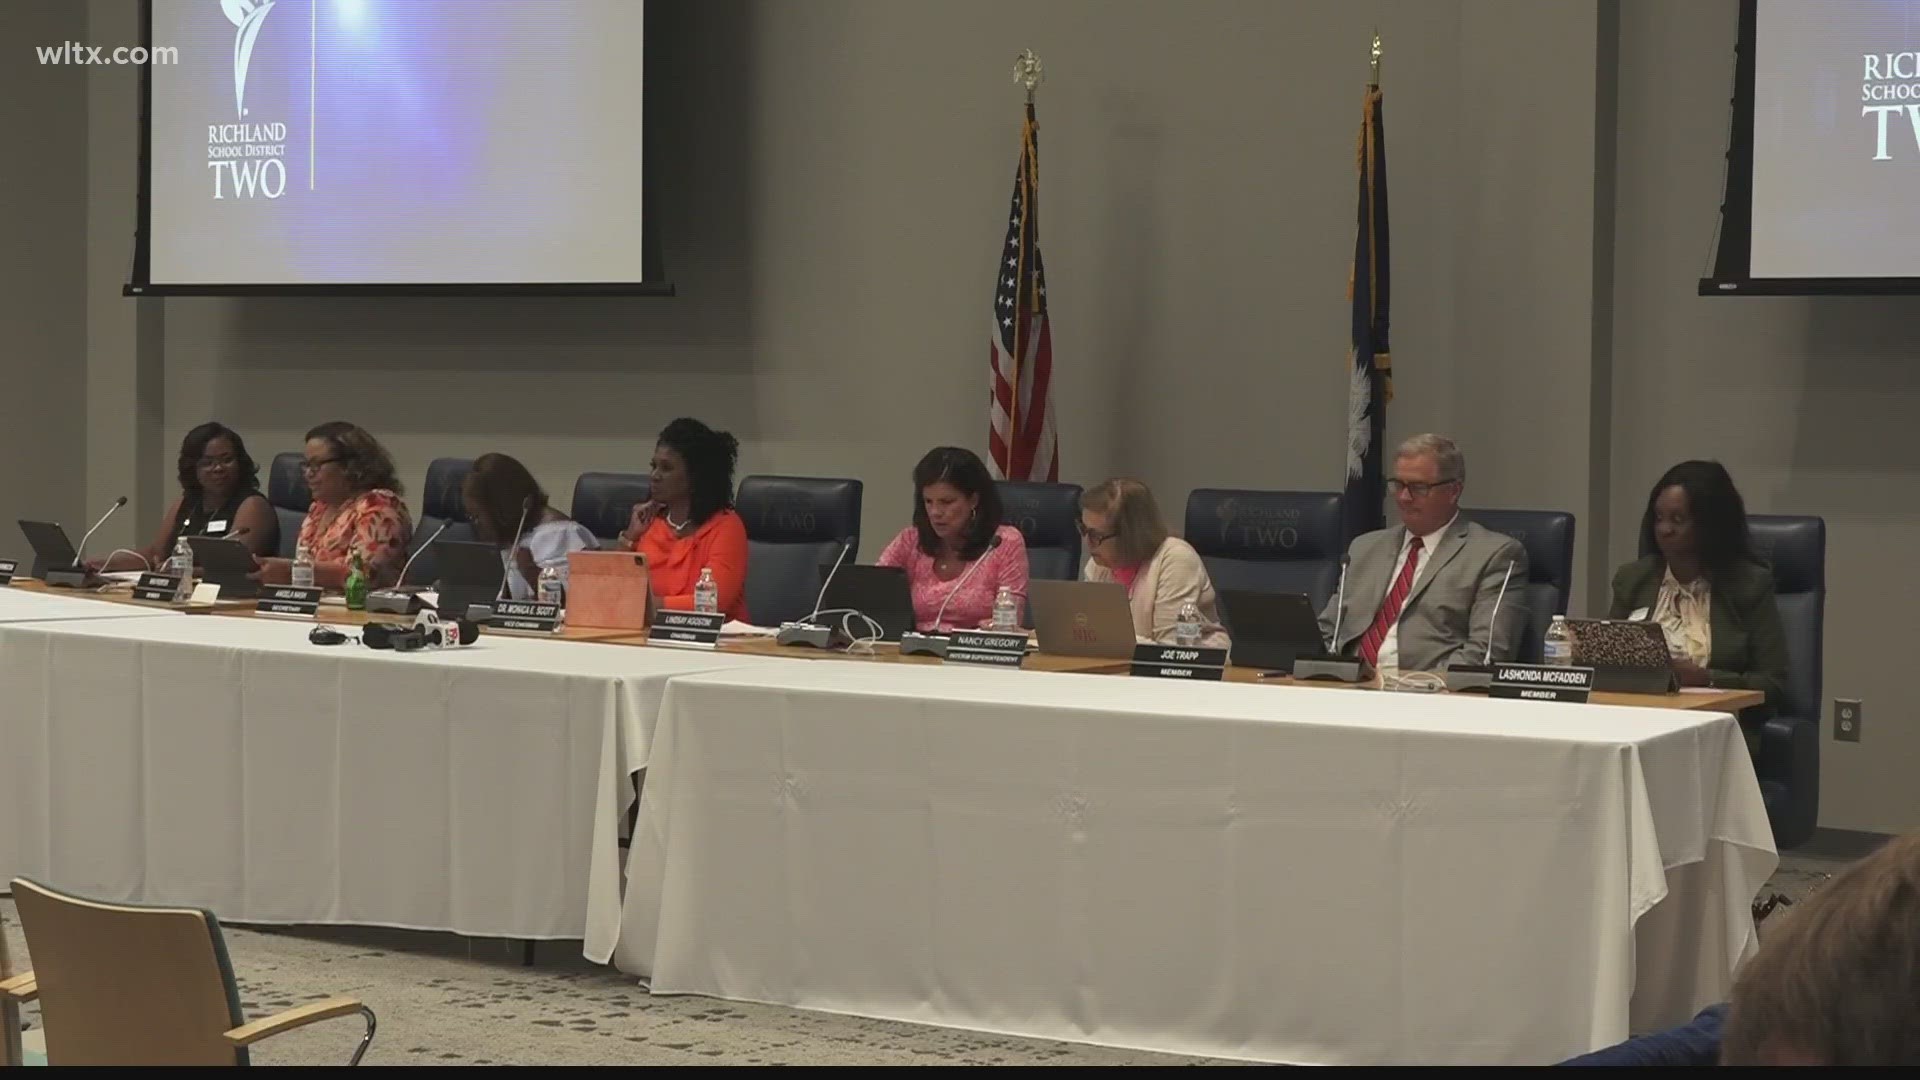 On Tuesday, the Richland Two school board made big moves for district finances, safety, and credit requirements.